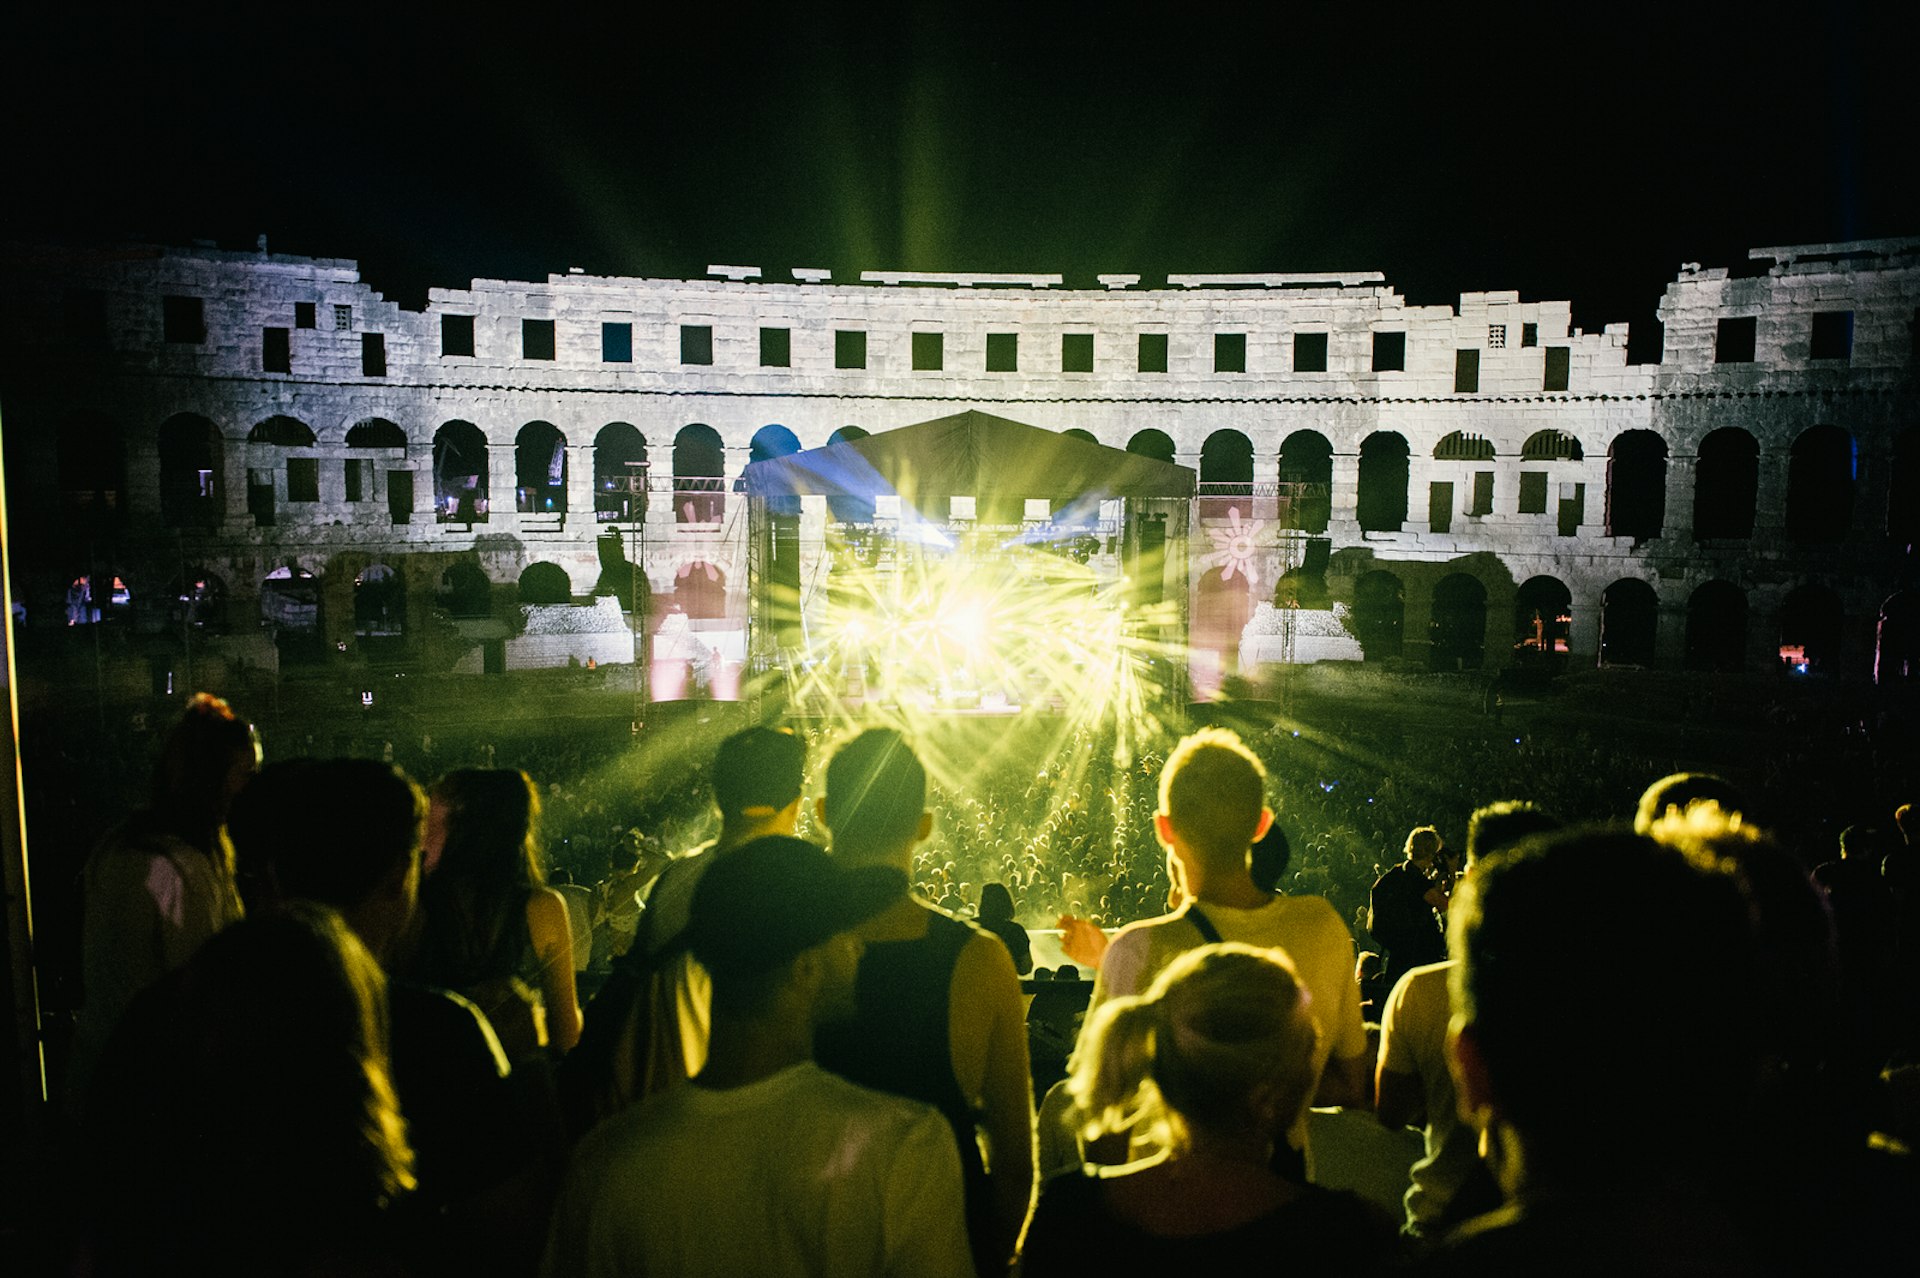 Outlook Festival's opening concert in the Pula Roman amphitheatre